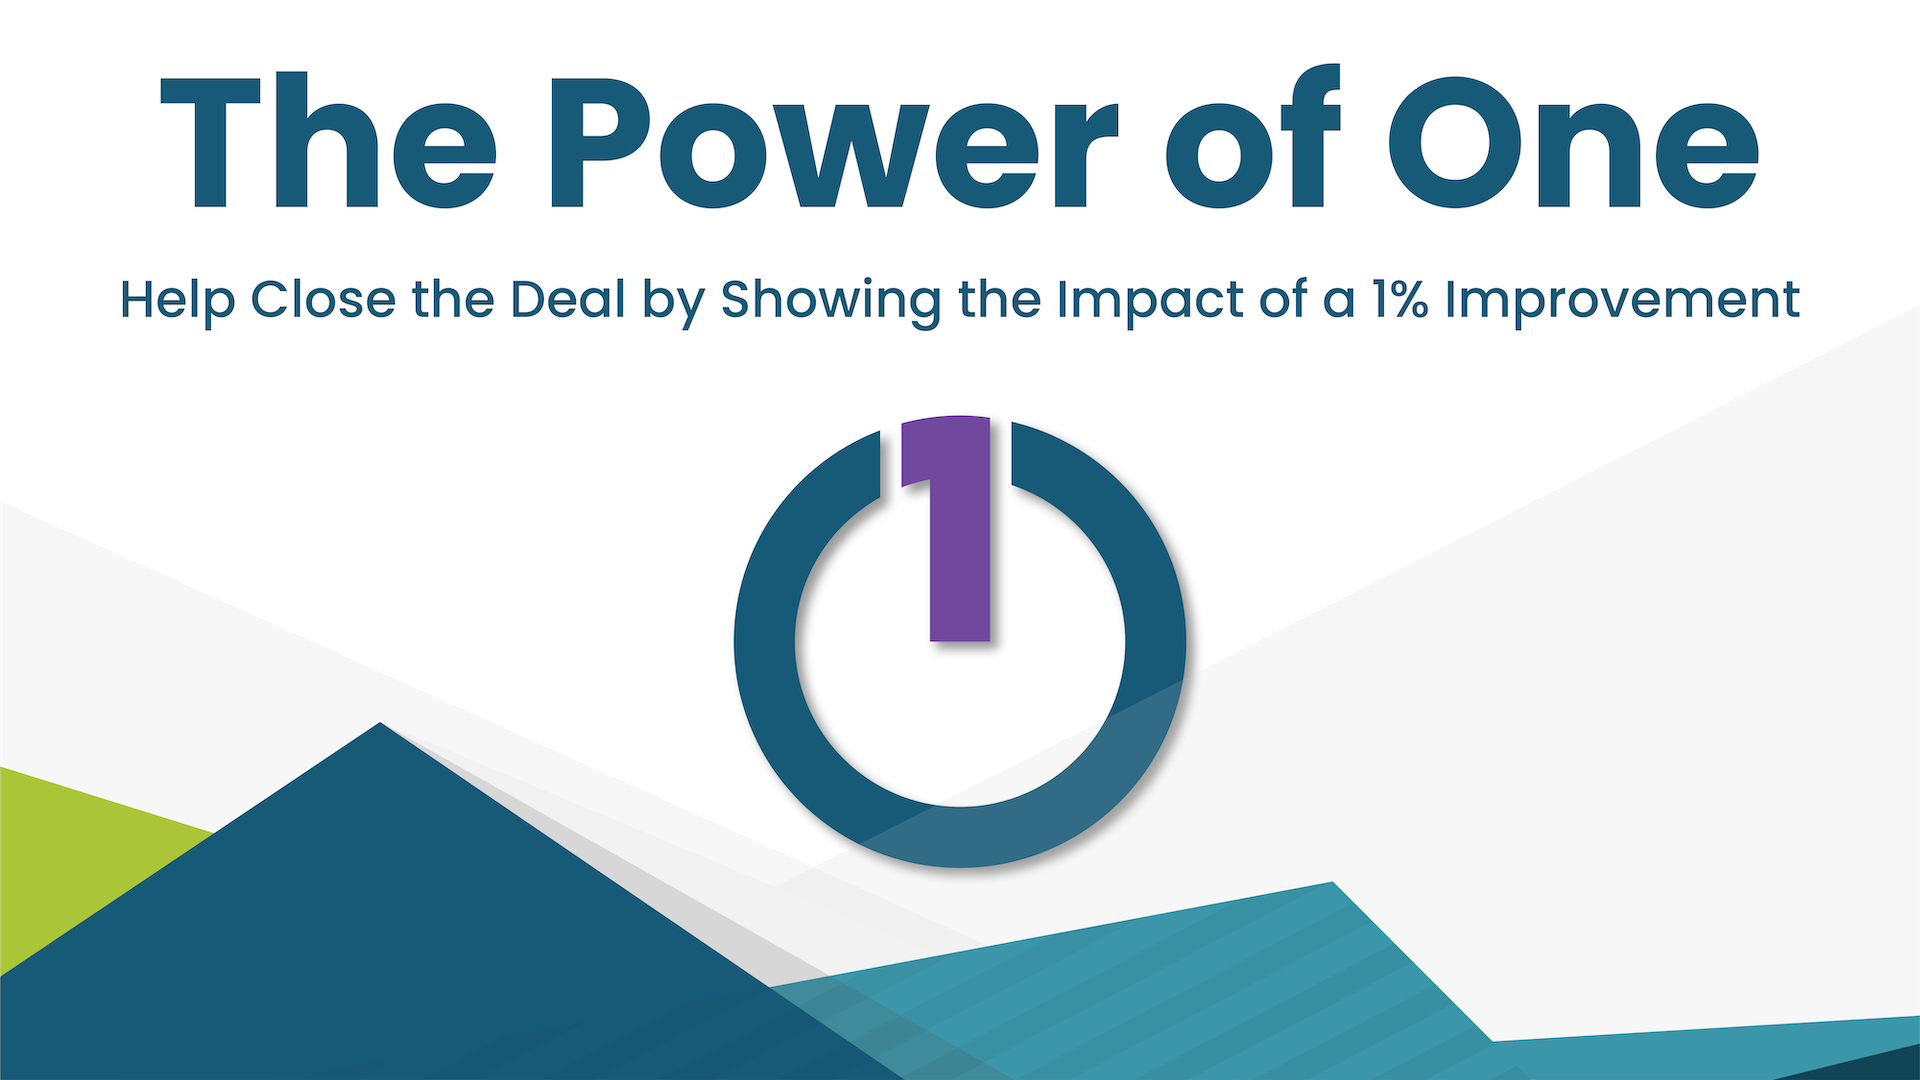 The Power of One - Close the Deal by Showing the Impact of a 1% Improvement